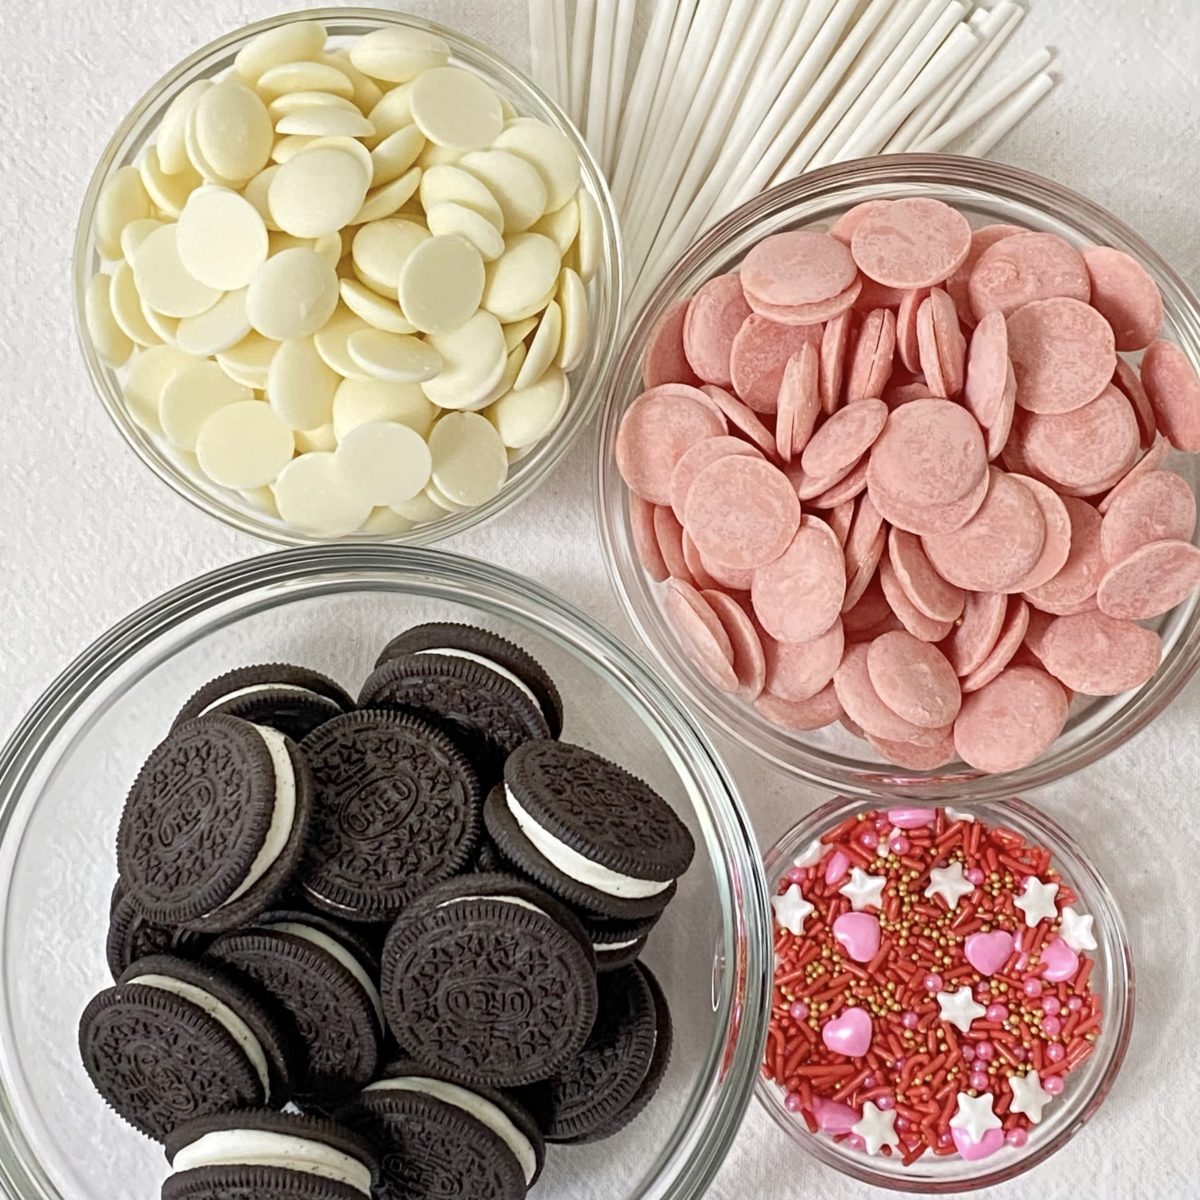 Ingredients to make Valentine's Day Oreo pops including white and pink melting wafers, Oreos, Valentine's sprinkles, and lollipop sticks.